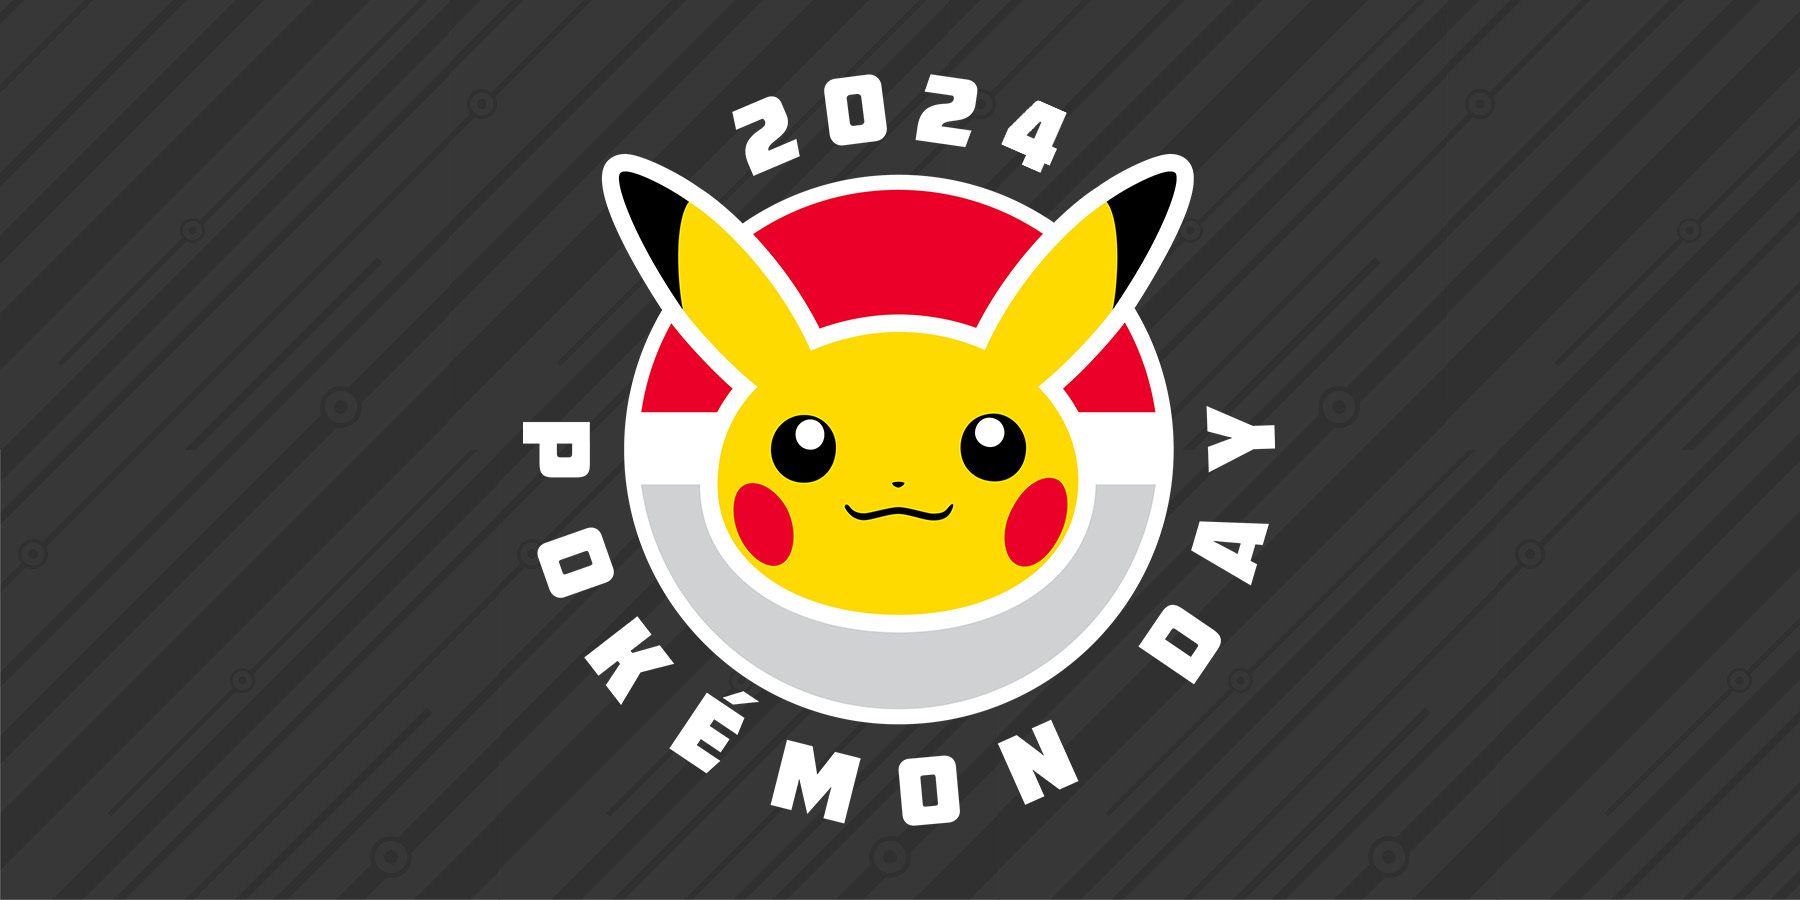 Pokémon Day 2024 Predictions: What Pokémon Games May Get Revealed